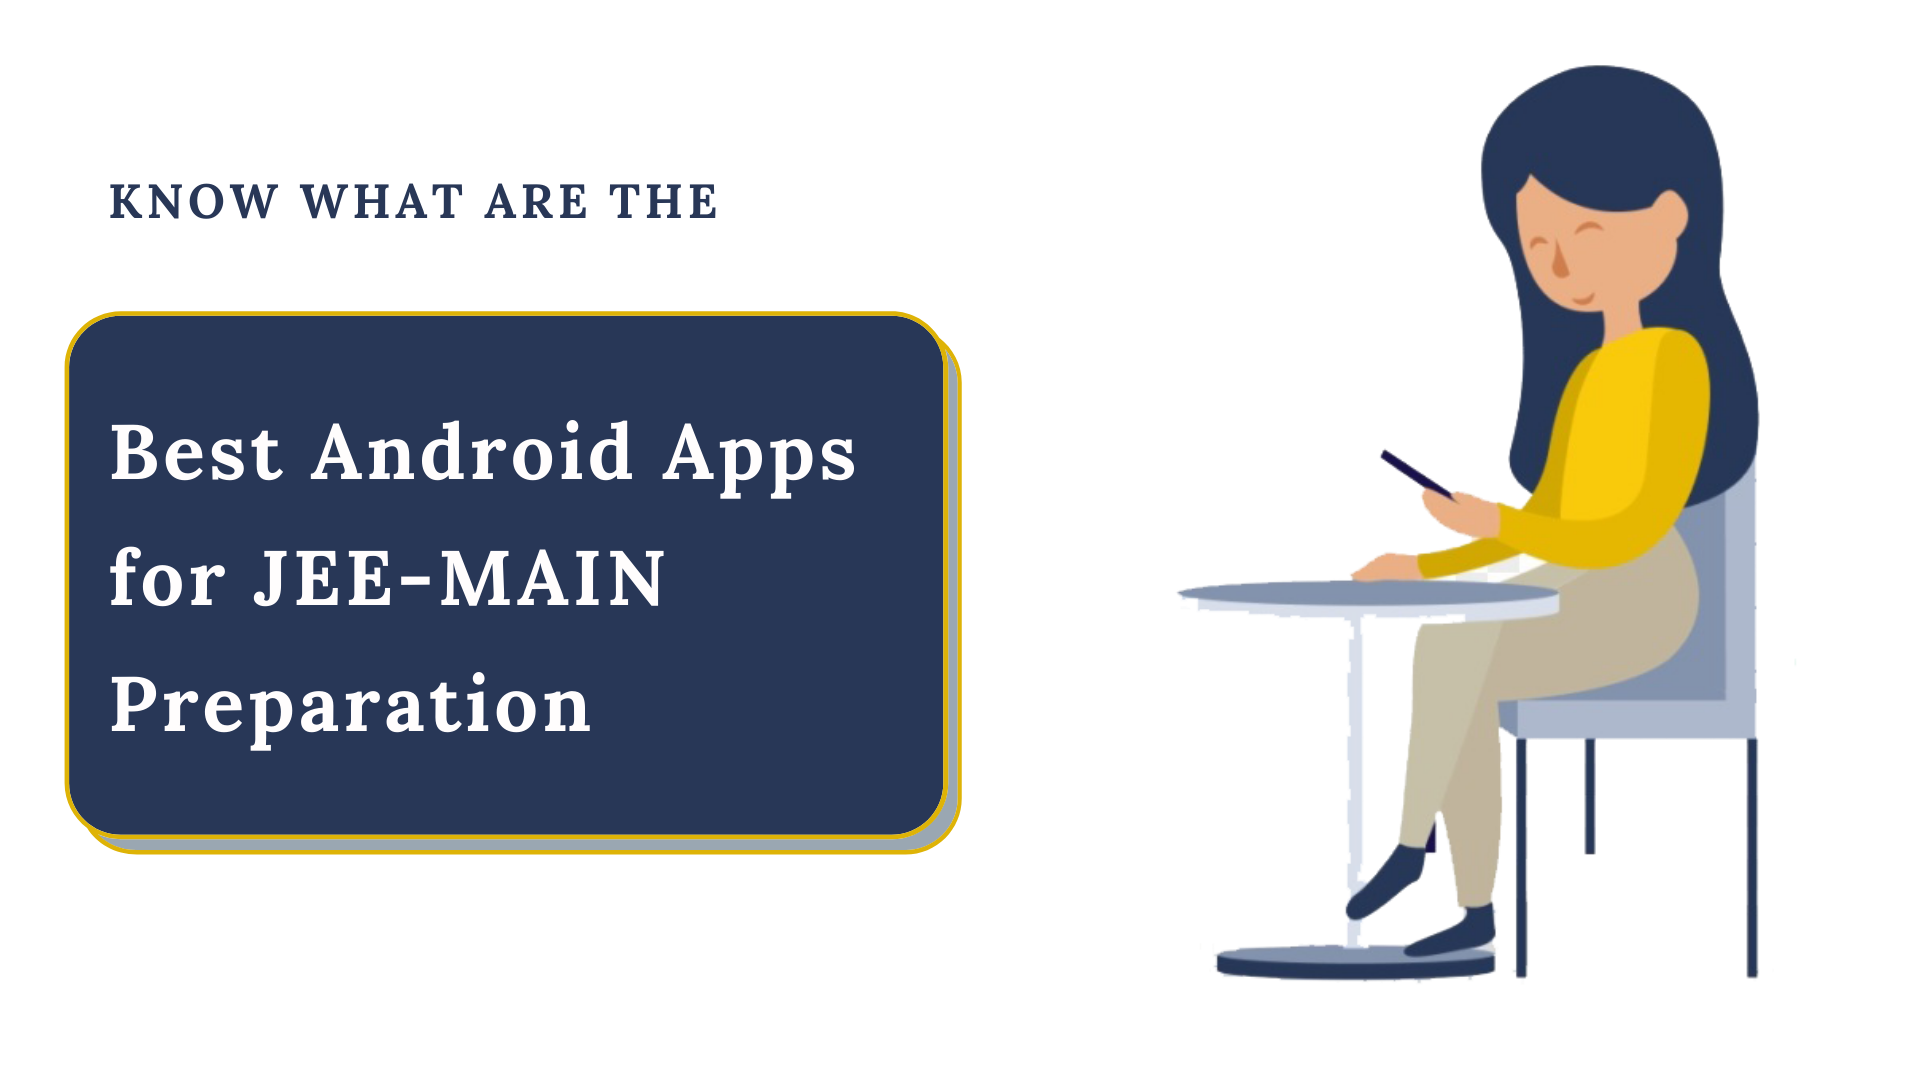 Tips to Prepare JEE Main with Android App | EducationAsia